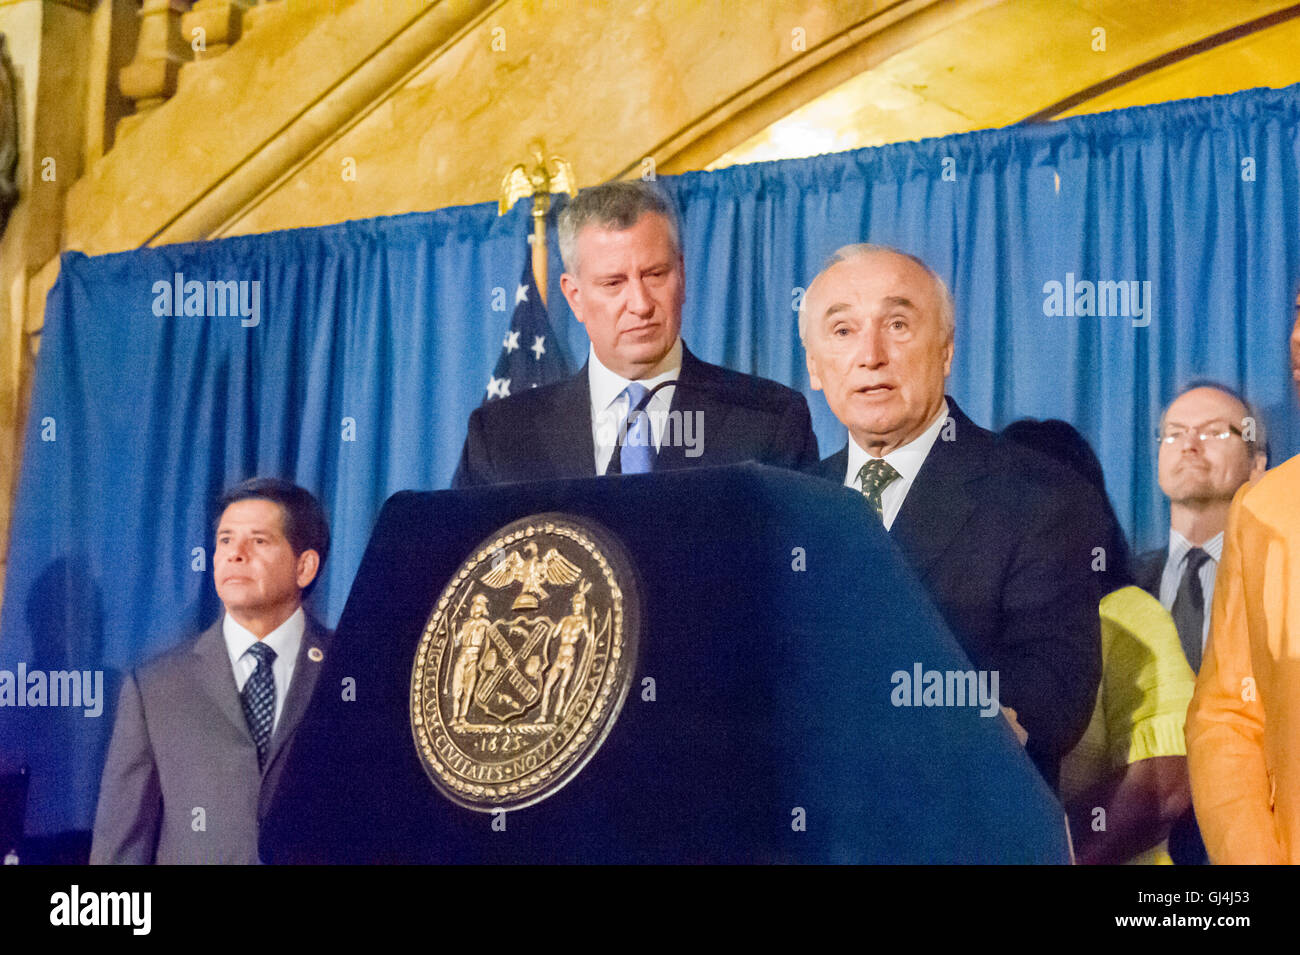 New York Mayor Bill de Blasio, left, and NYPD Commissioner William Bratton at a bill signing related to NYPD reporting procedures on Wednesday, August 3, 2016 in New York. (© Frances M. Roberts) Stock Photo